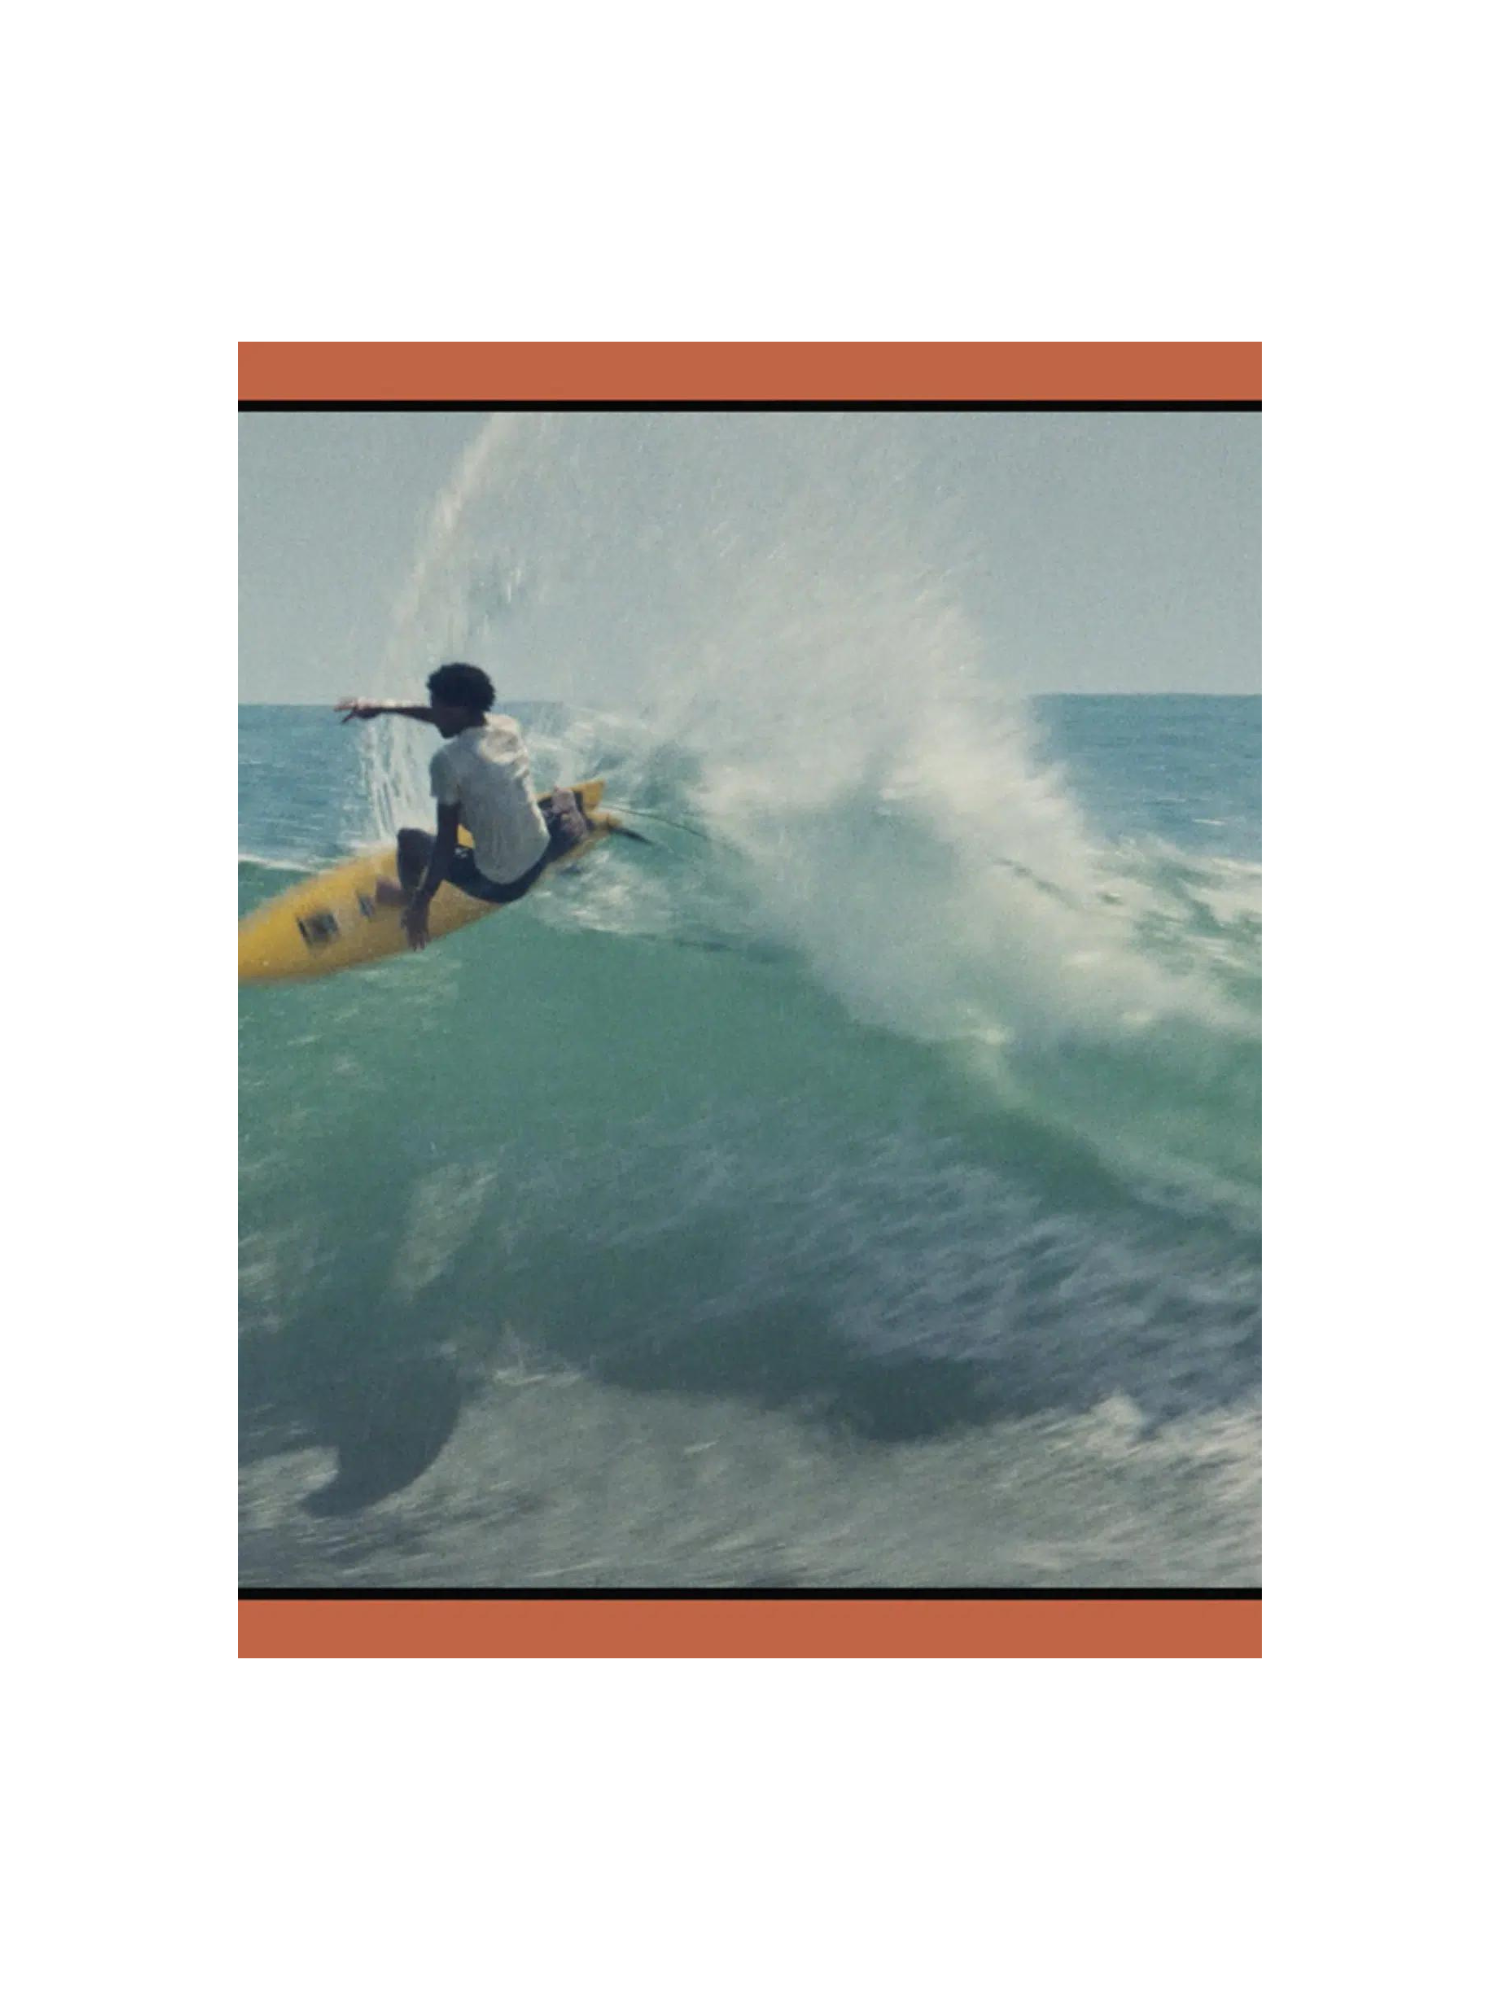 Emocean ~ Issue 04 ~ Devotion Featuring Mikey February, Matt Warshaw, Ellis Ericson and more | Keel Surf & Supply